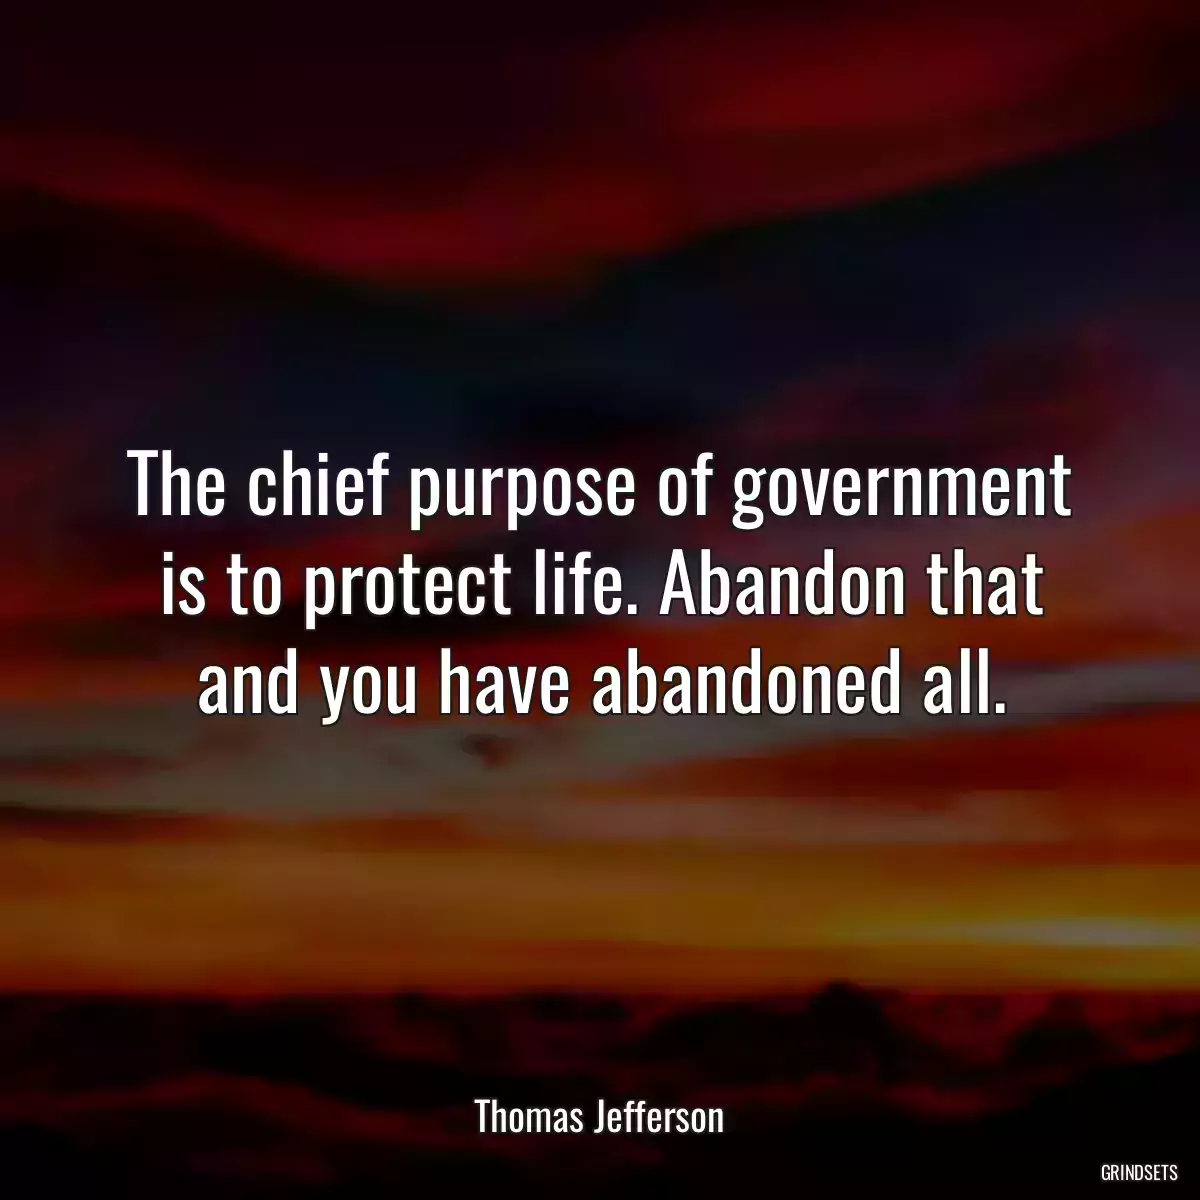 The chief purpose of government is to protect life. Abandon that and you have abandoned all.